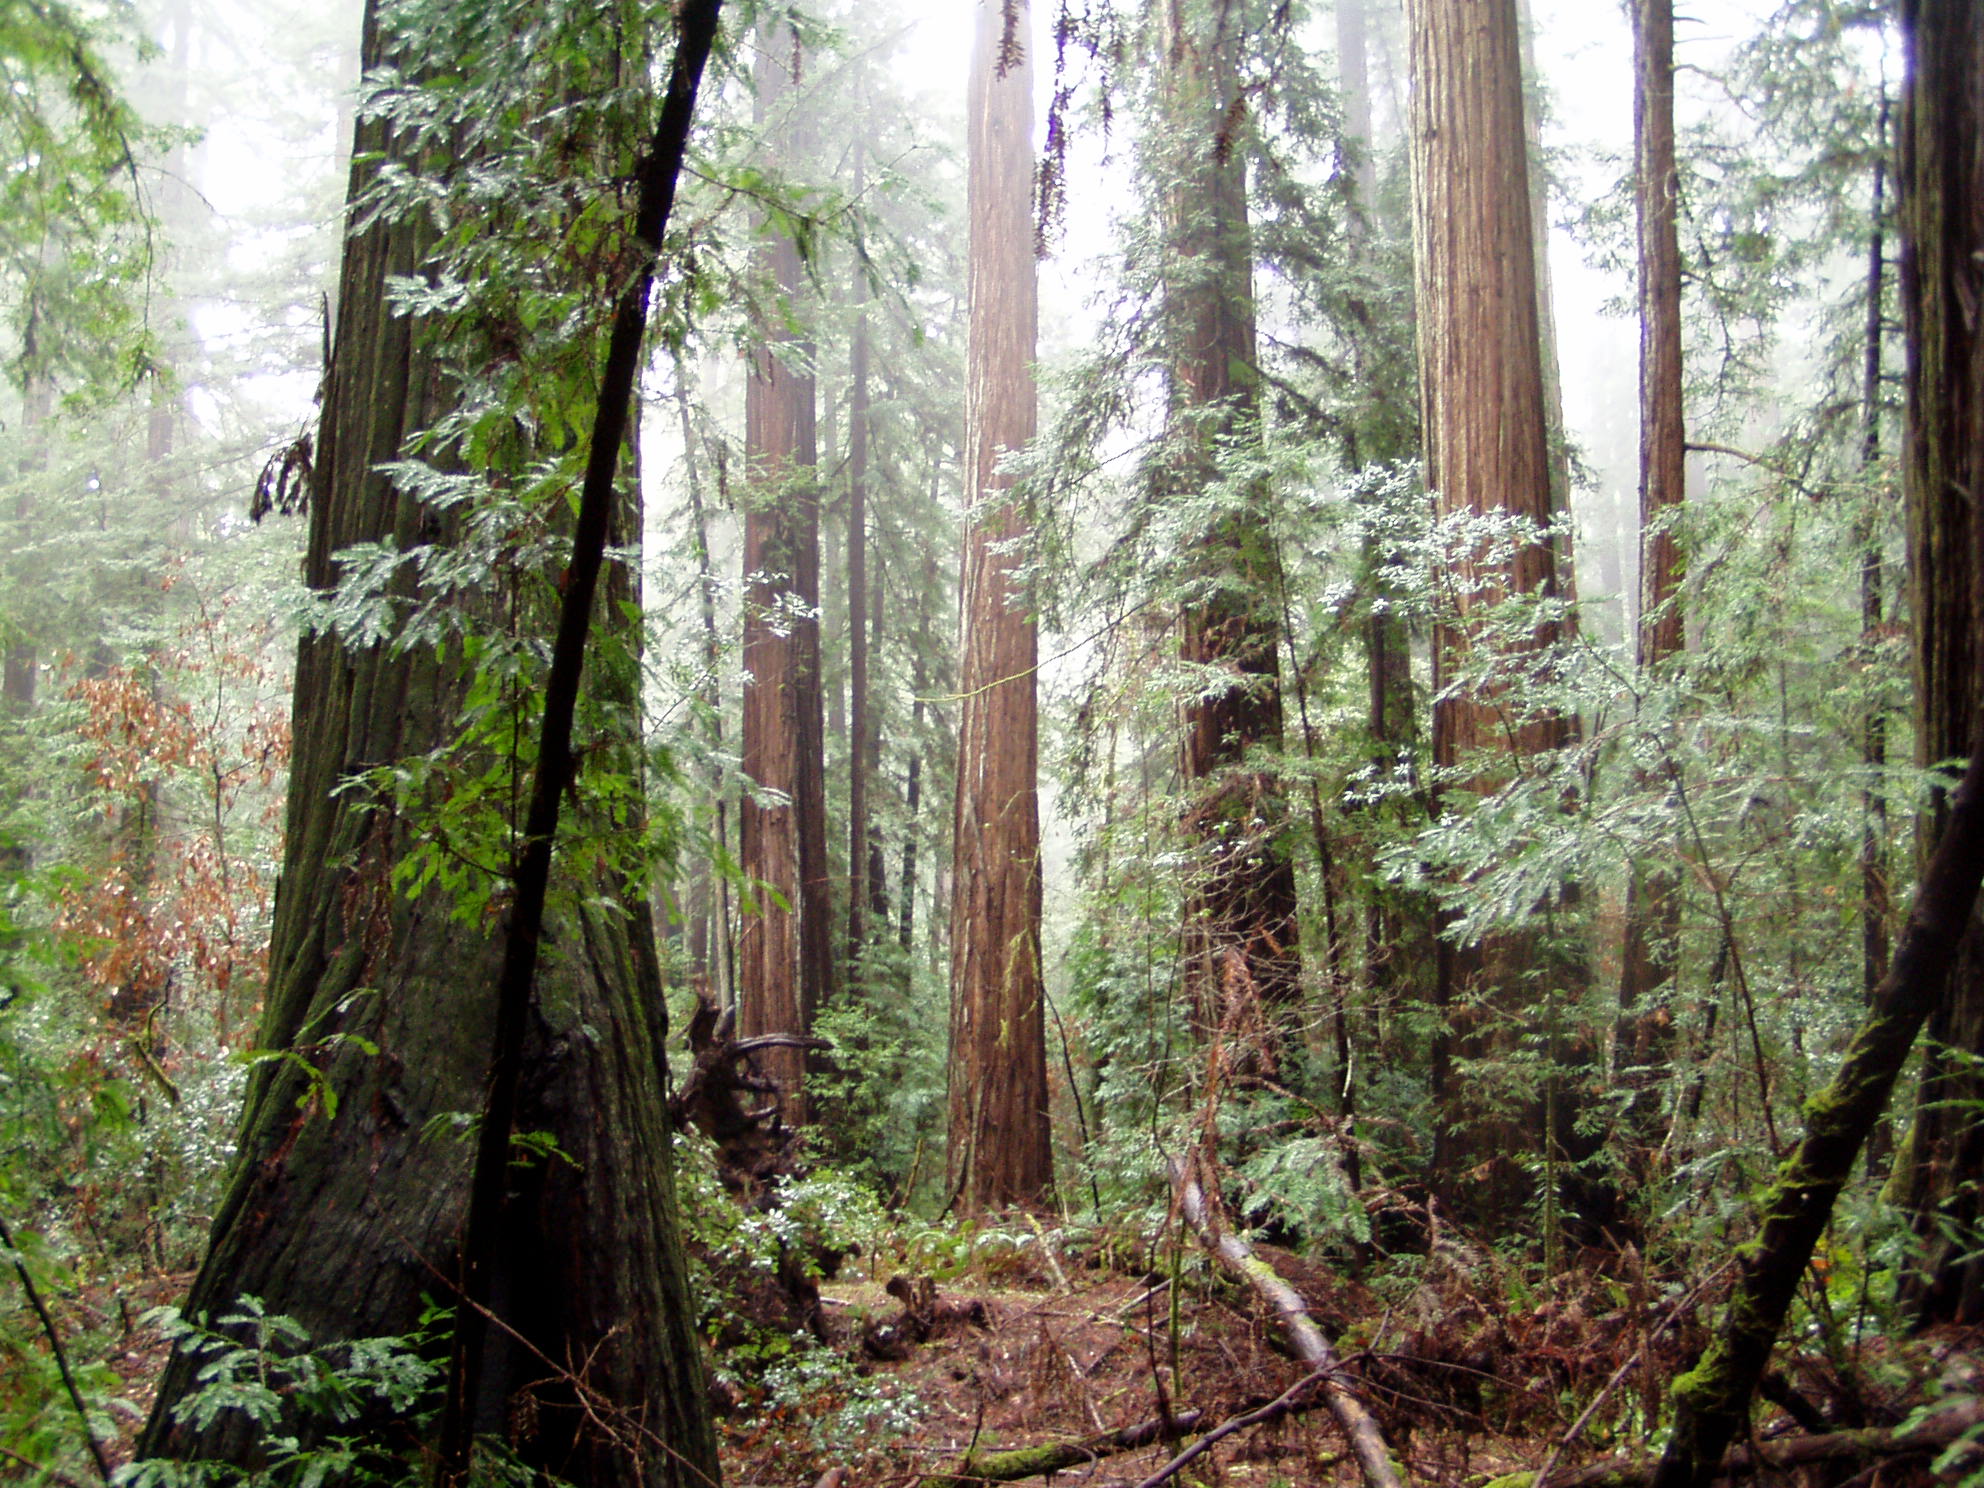 Armstrong Redwood State Natural Reserve